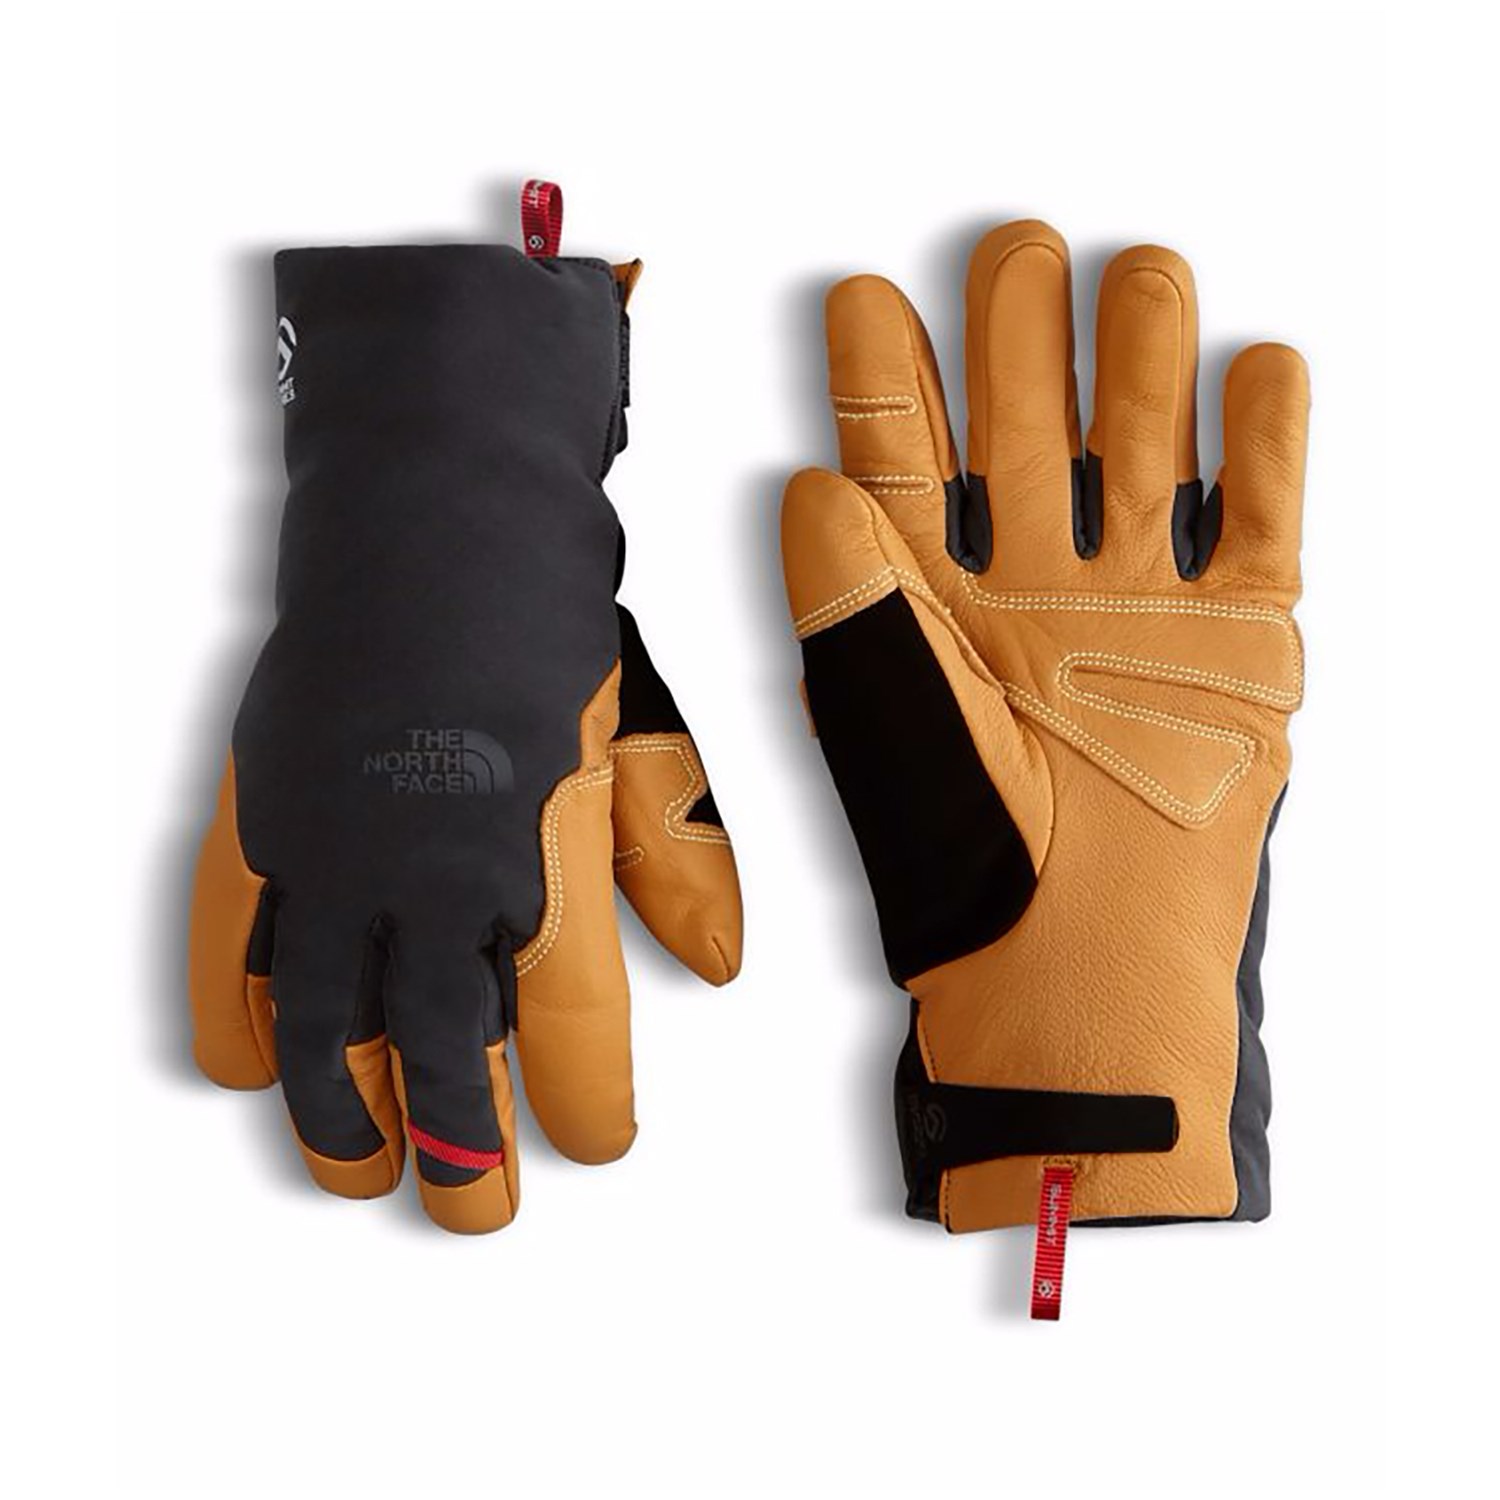 north face summit g3 glove review